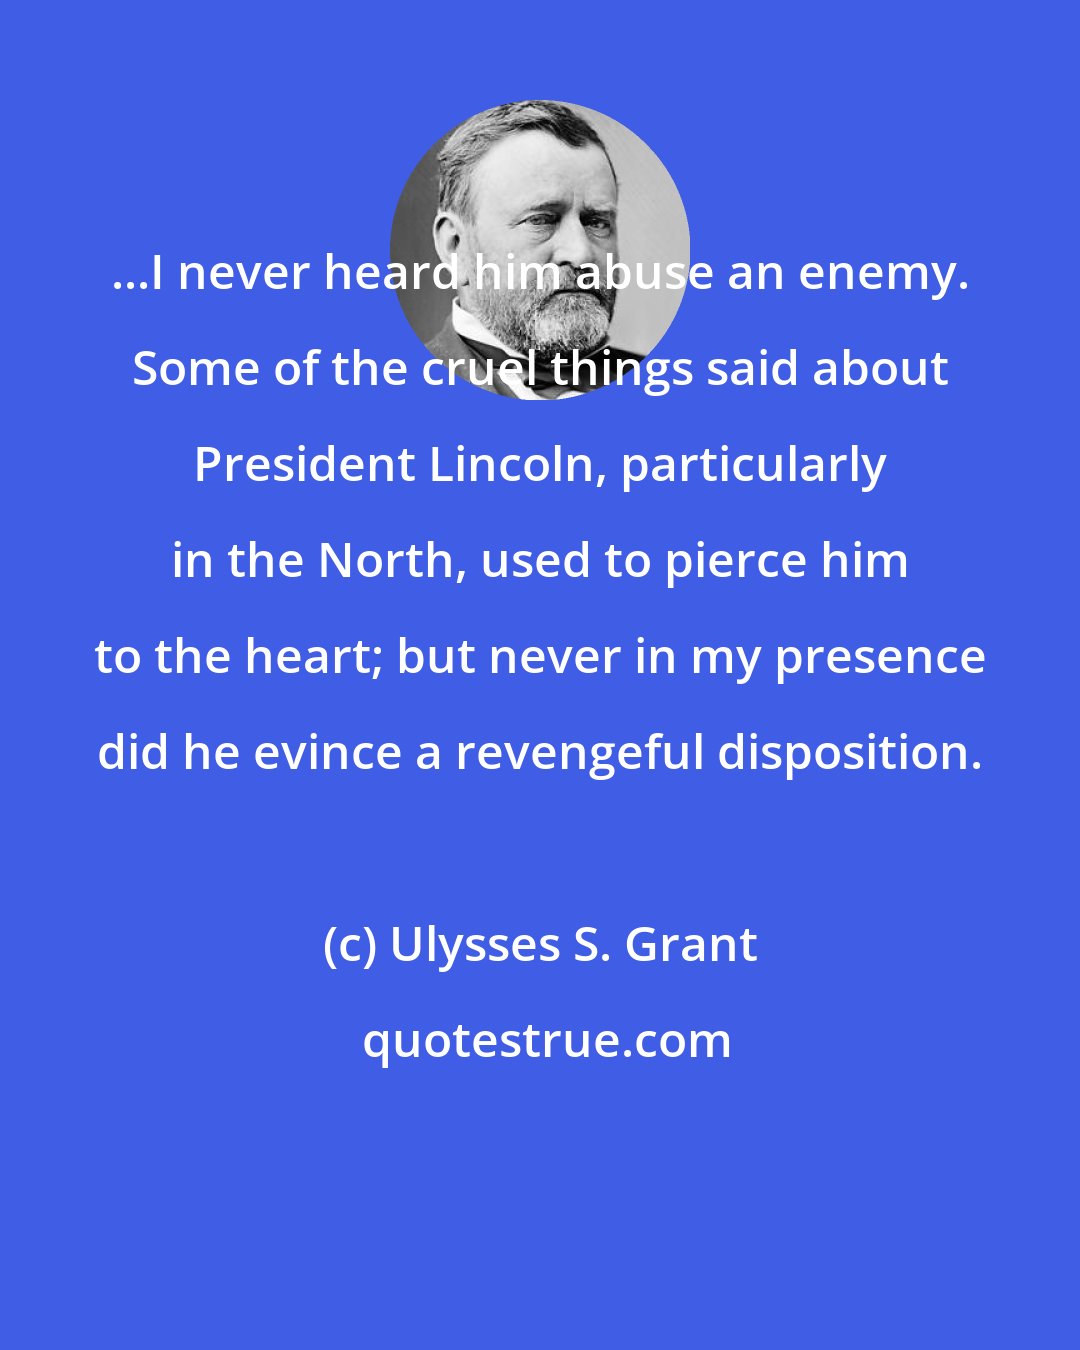 Ulysses S. Grant: ...I never heard him abuse an enemy. Some of the cruel things said about President Lincoln, particularly in the North, used to pierce him to the heart; but never in my presence did he evince a revengeful disposition.